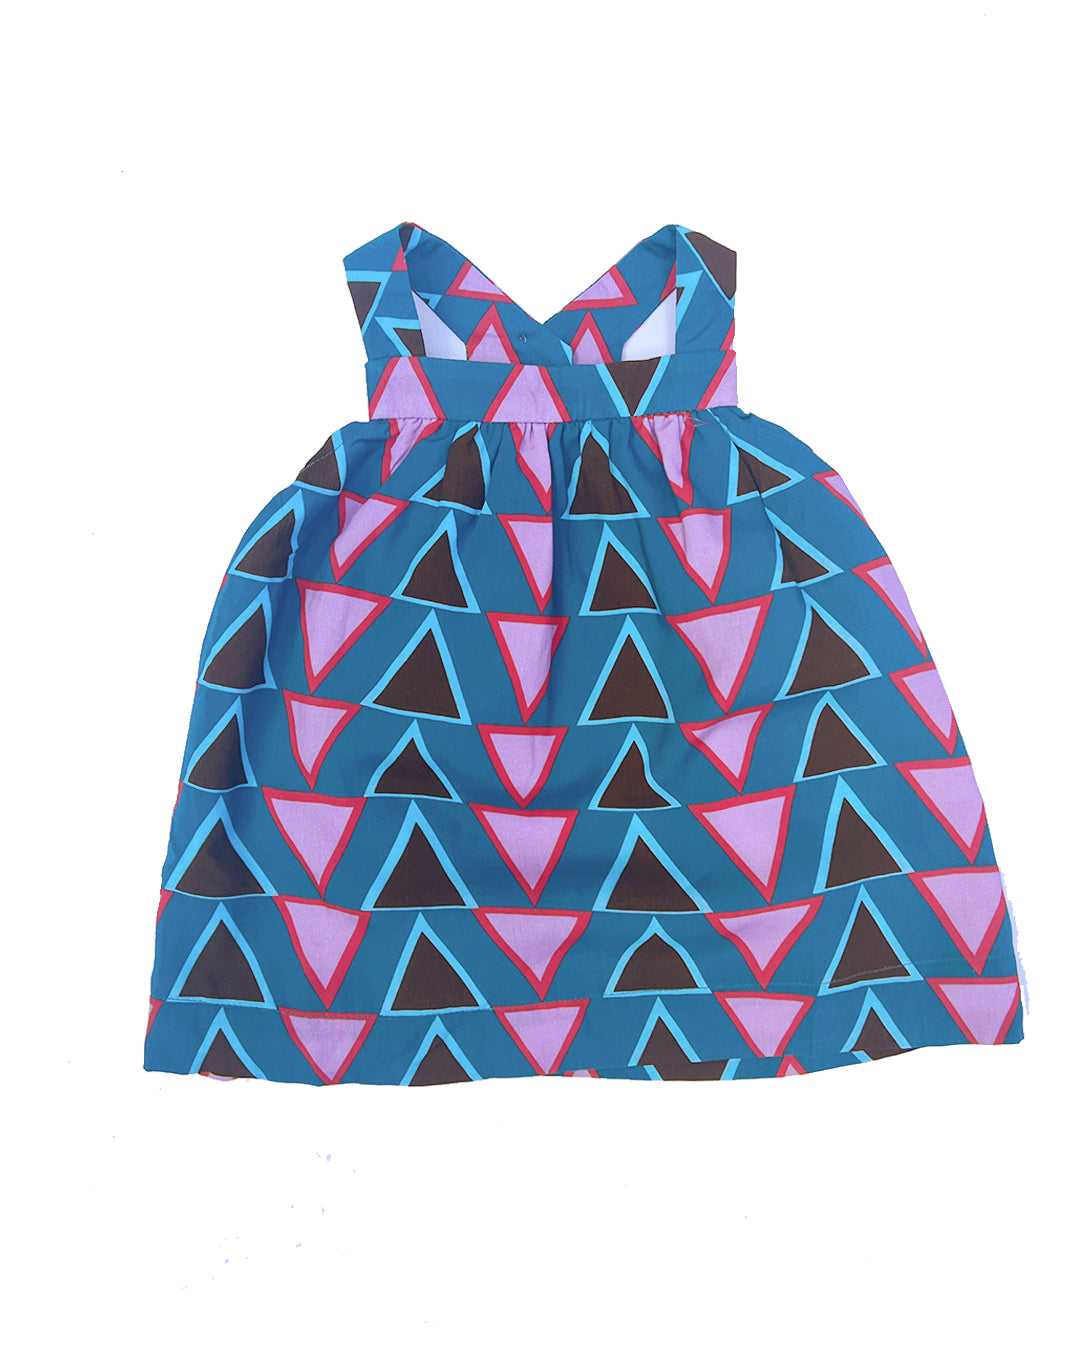 Stacked Triangles Baby Dress | cukimber designs